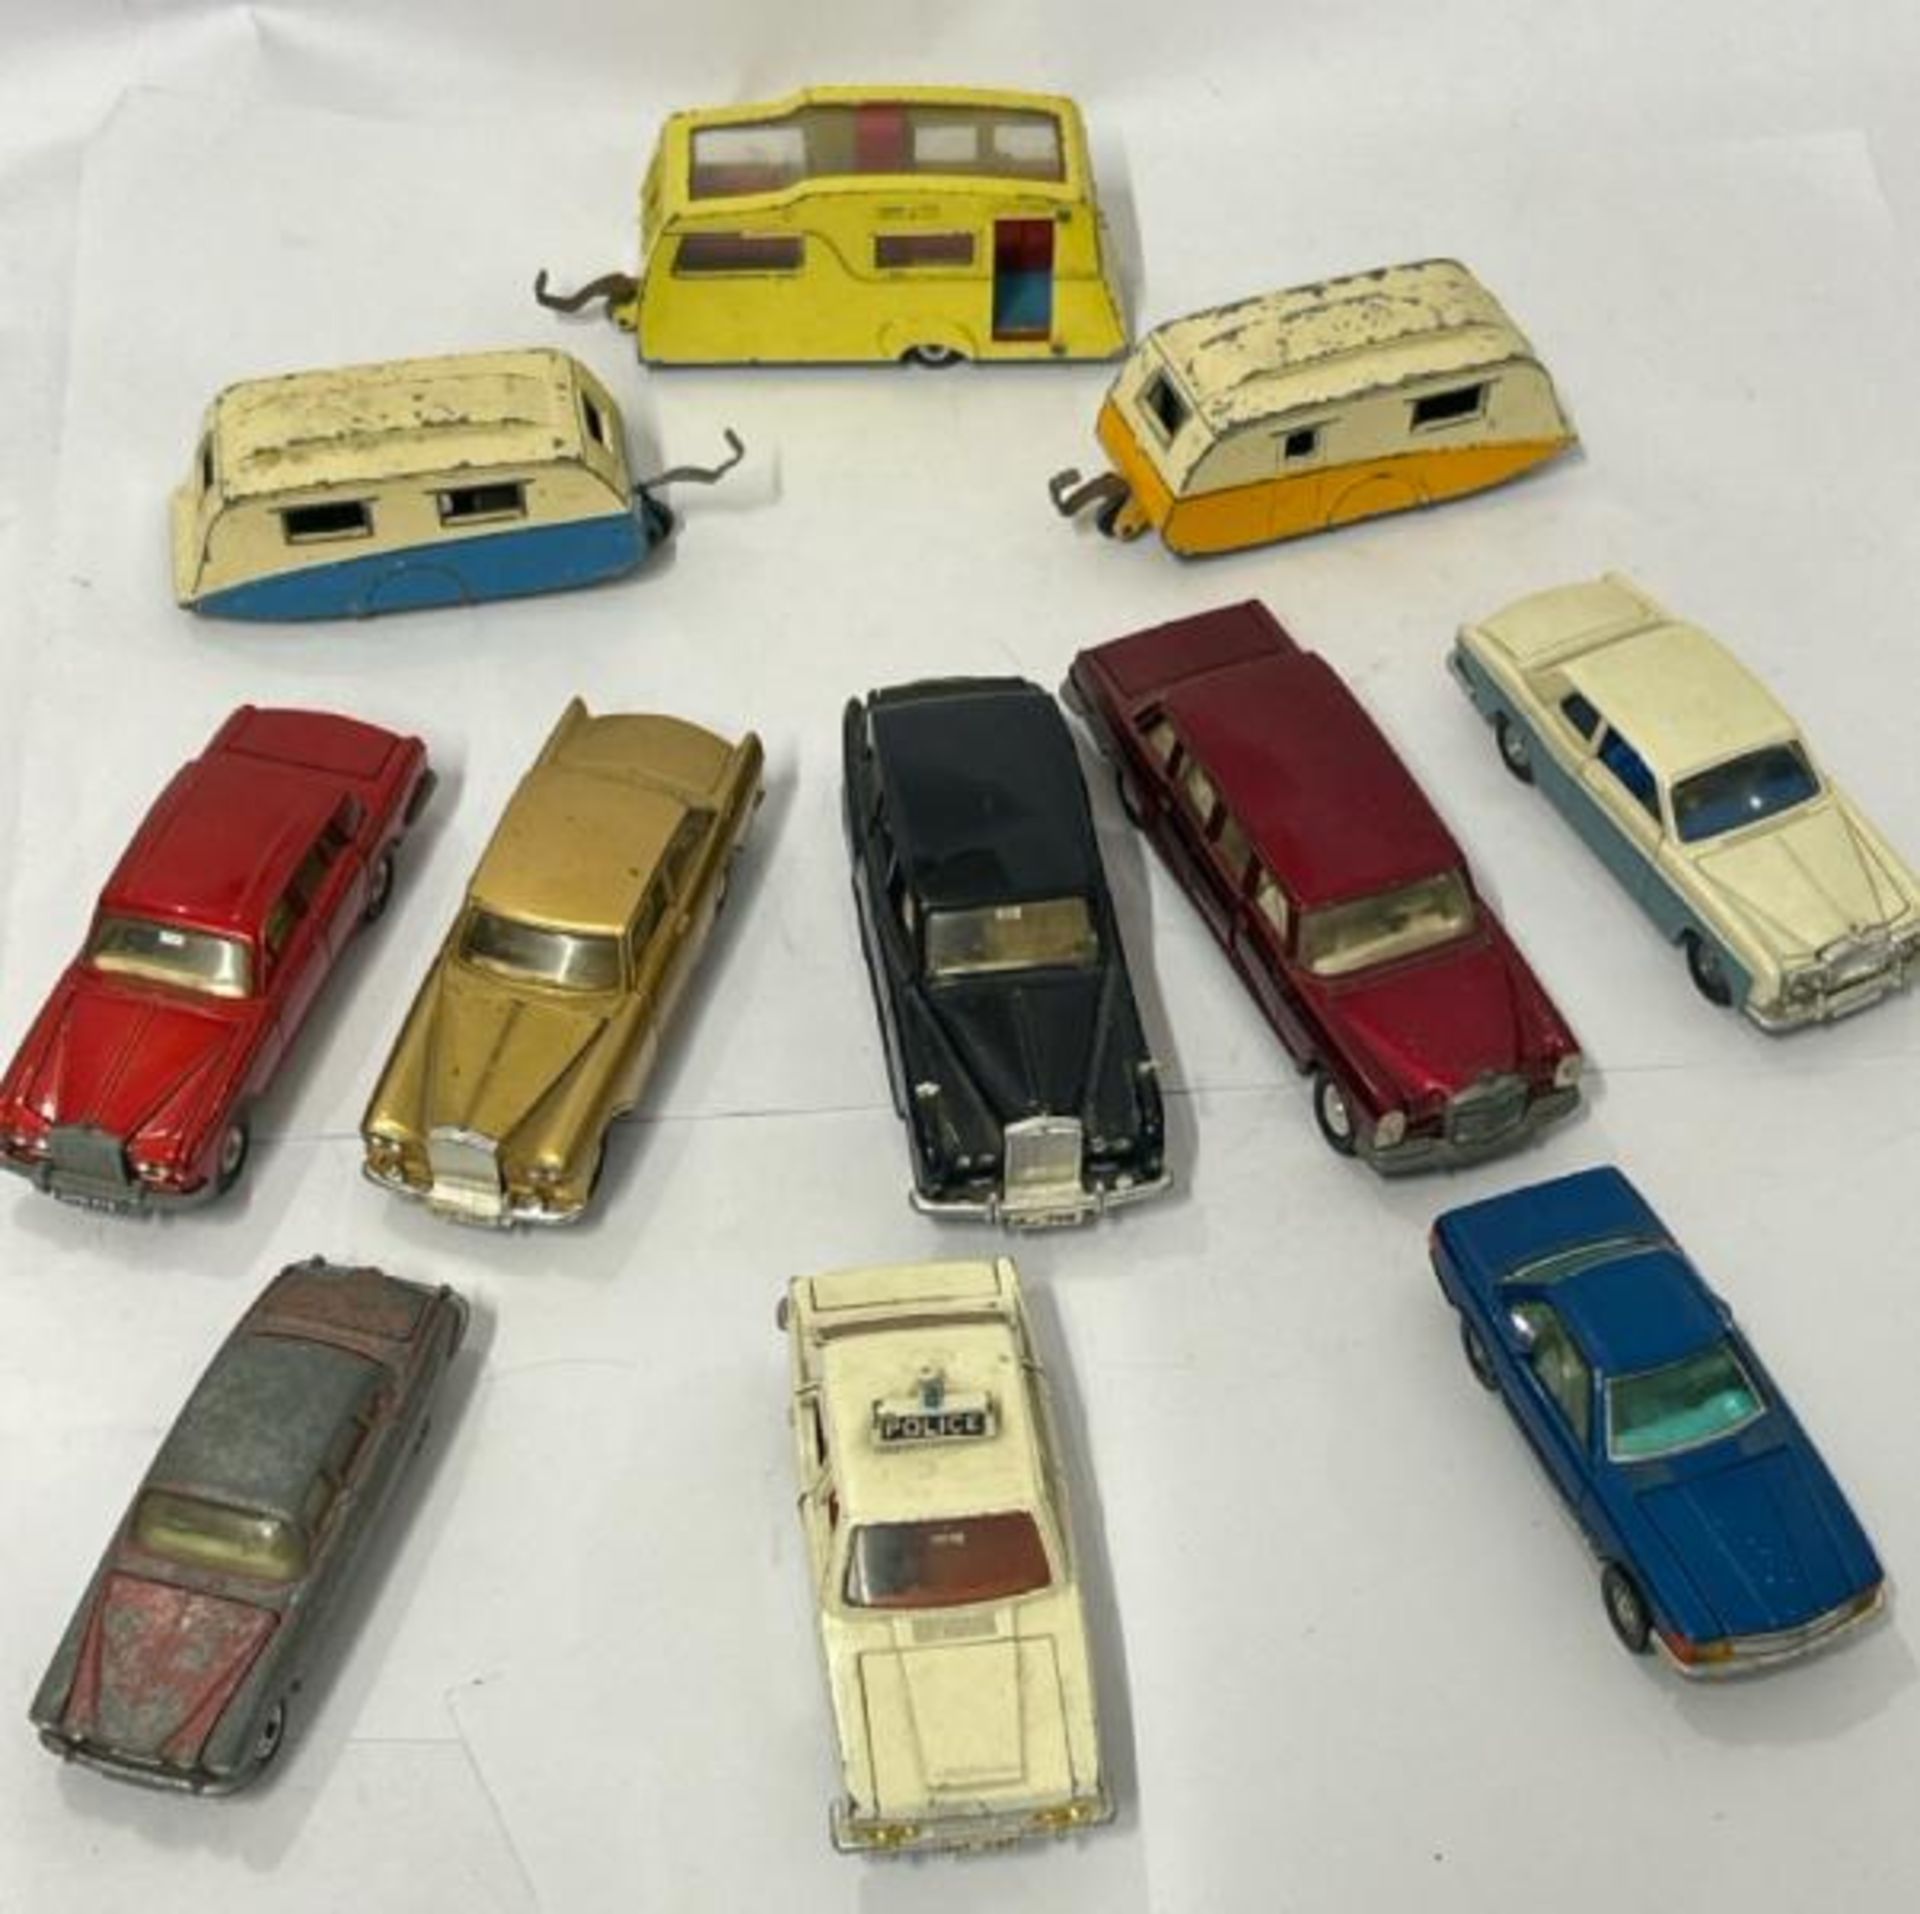 Unboxed Dinky & Corgi cars and caravans including Corgi Silver Shadow Rolls Royce and Dinky Rolls